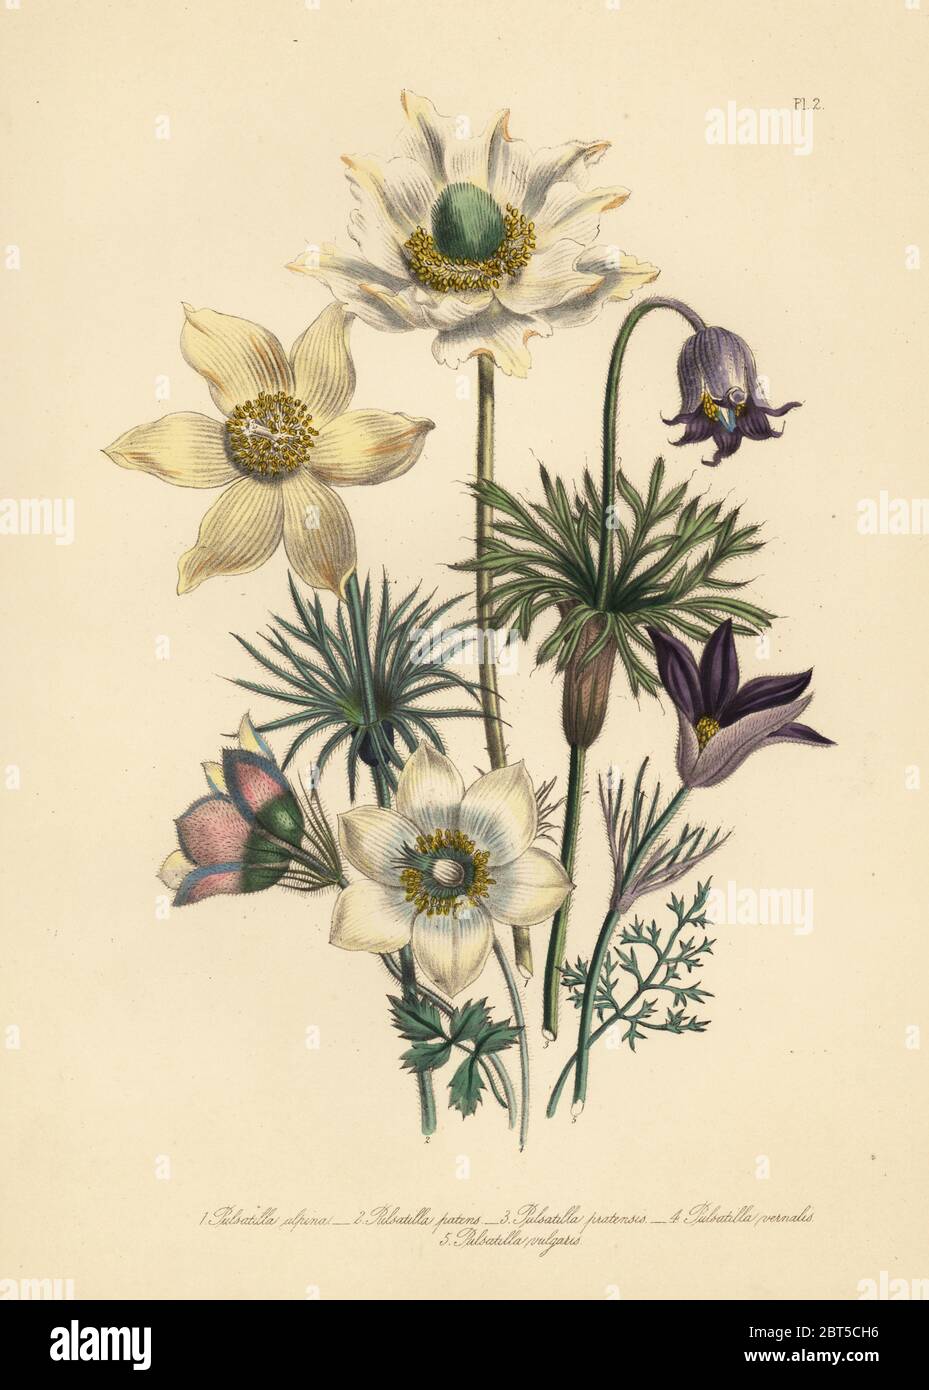 Alpine pulsatilla, Pulsatilla alpina, spreading pasqueflower, P. patens, meadow pasqueflower, P. pratensis, spring pasqueflower, P. vernalis, and common pasque flower, P. vulgaris. Handfinished chromolithograph by Henry Noel Humphreys after an illustration by Jane Loudon from Mrs. Jane Loudon's Ladies Flower Garden of Ornamental Perennials, William S. Orr, London, 1849. Stock Photo